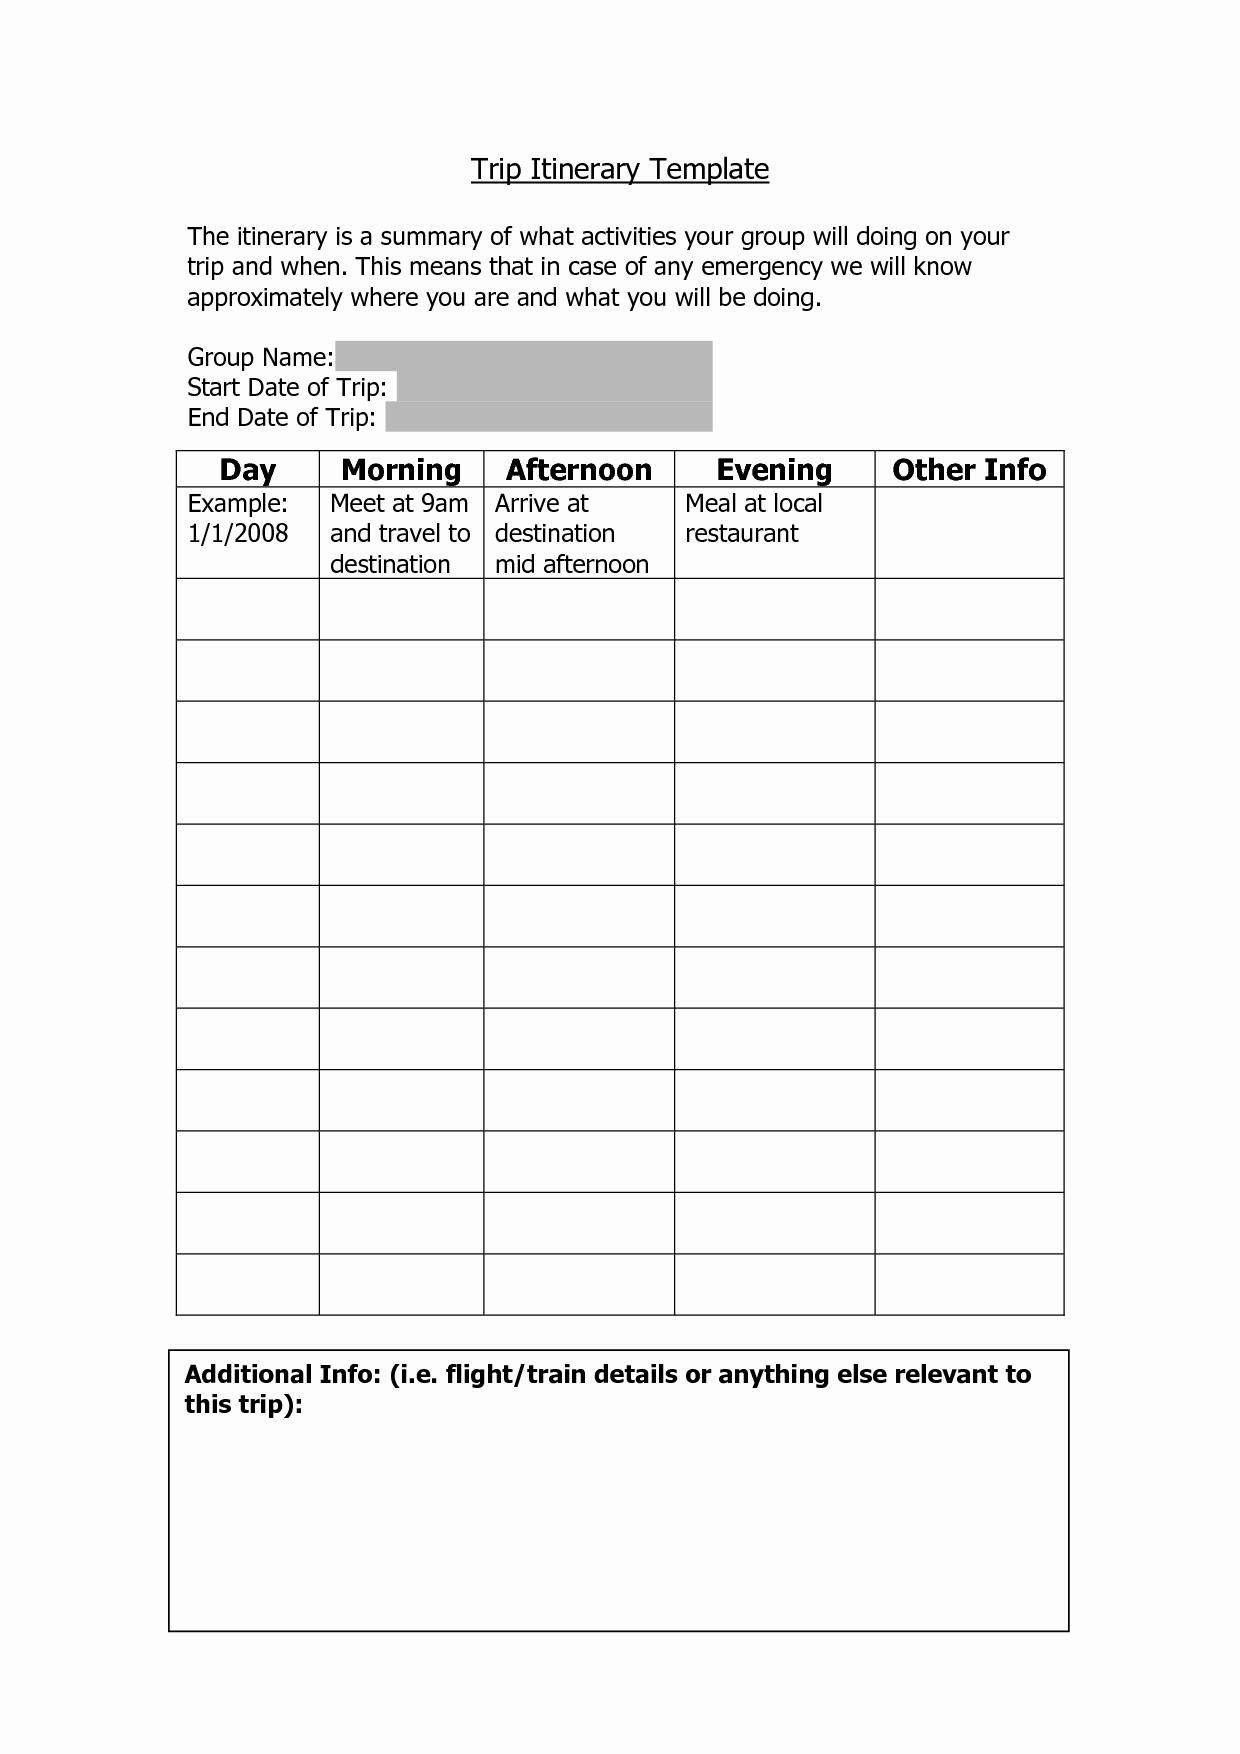 Vacation Itenerary Template Trip Itinerary Template